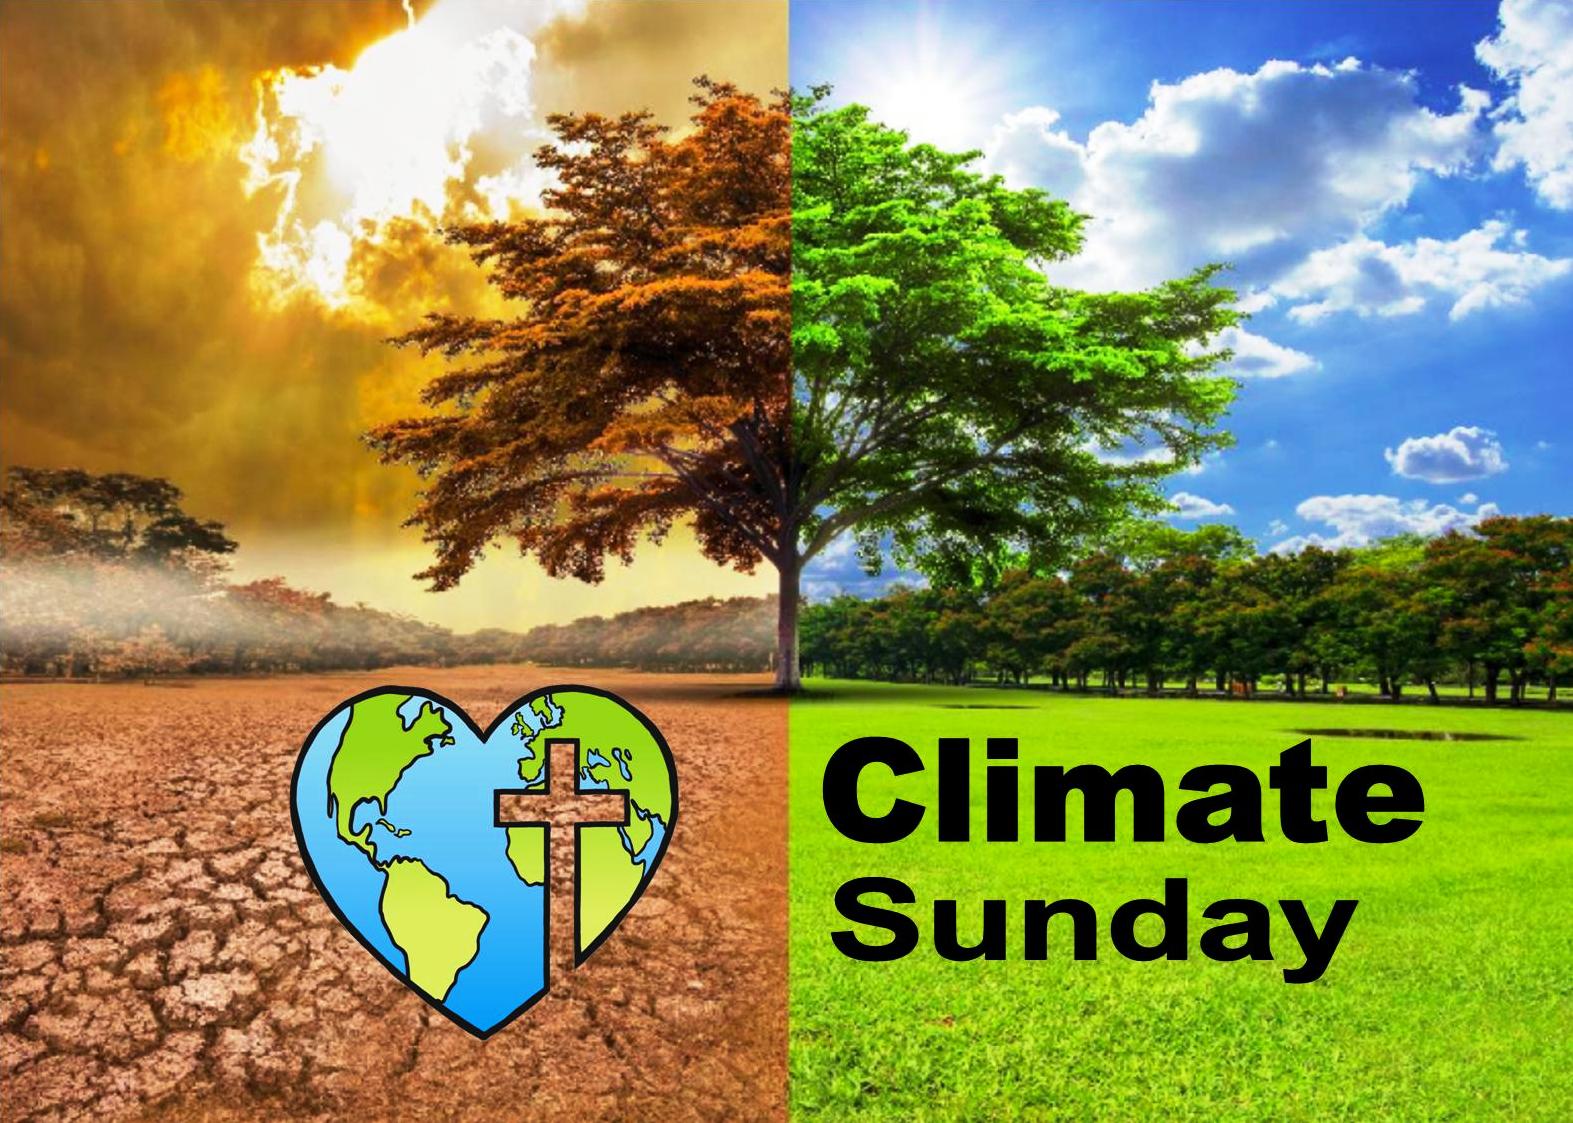 More than 5,000 Churches Participated in the Climate Sunday Initiative on the Eve of COP26